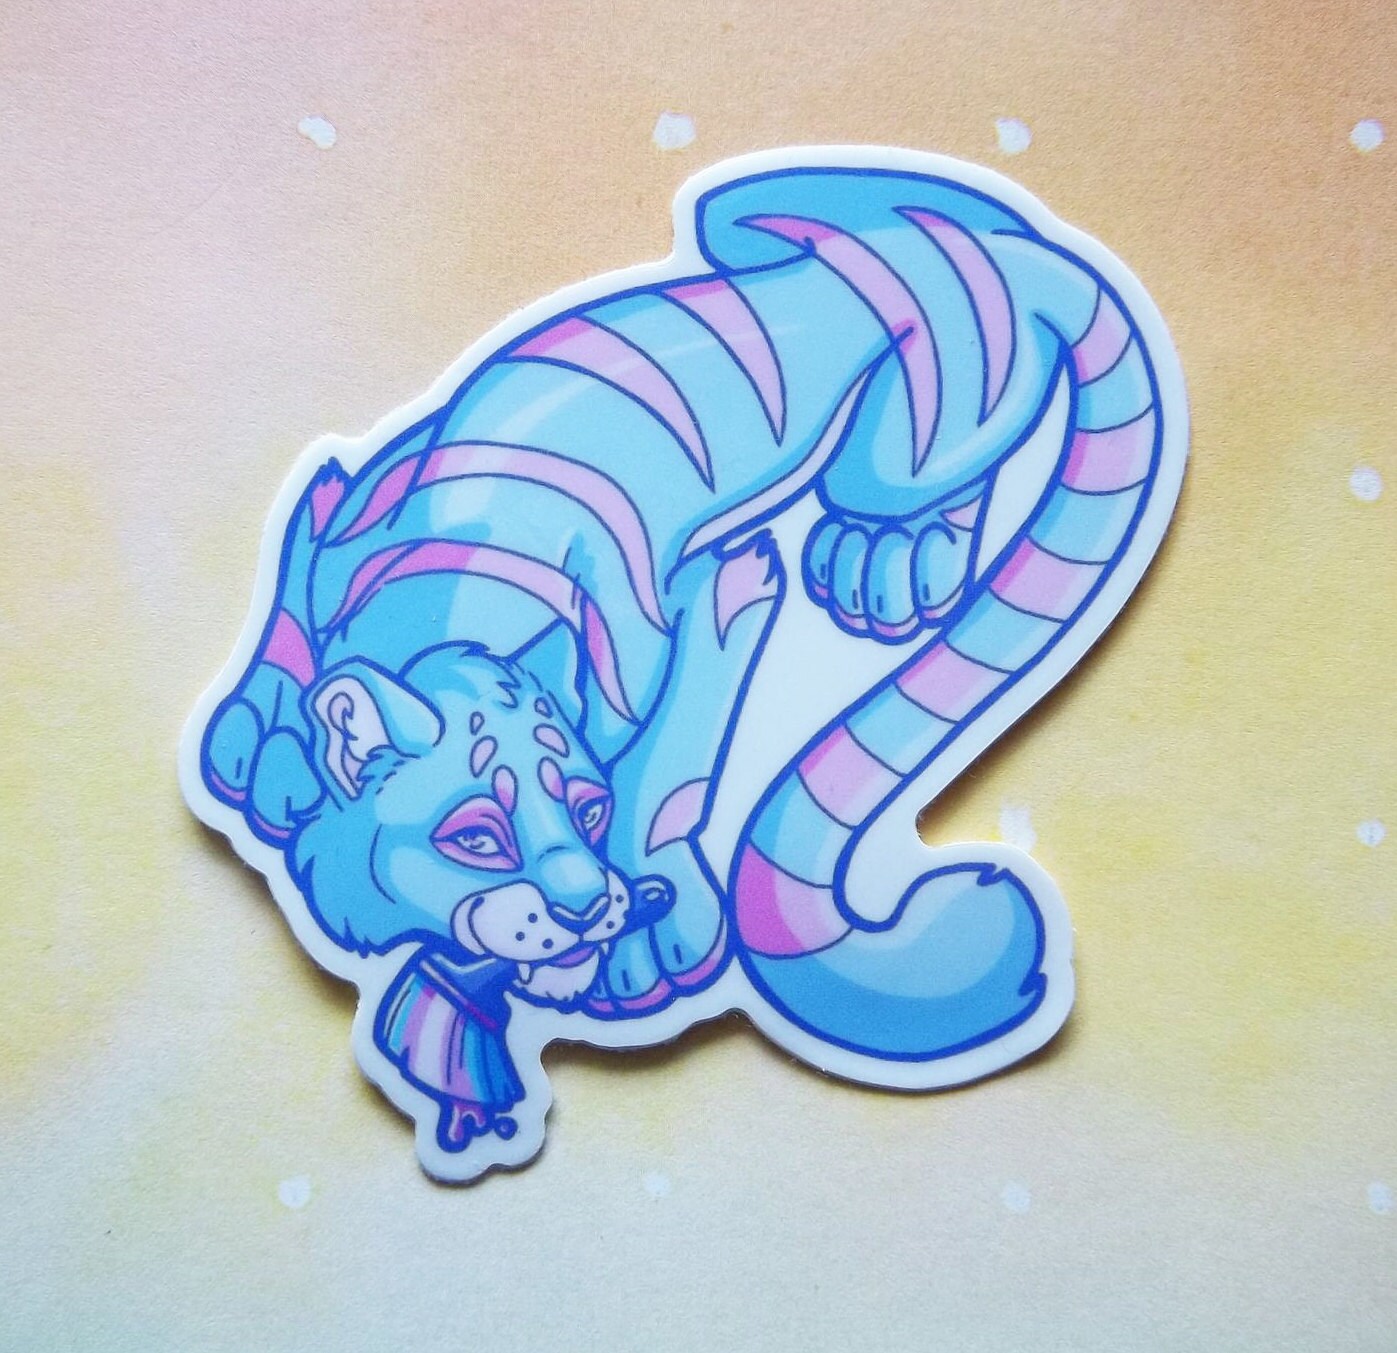 Feed Your Neopets Sticker Original Art - 3" Glossy Durable Vinyl